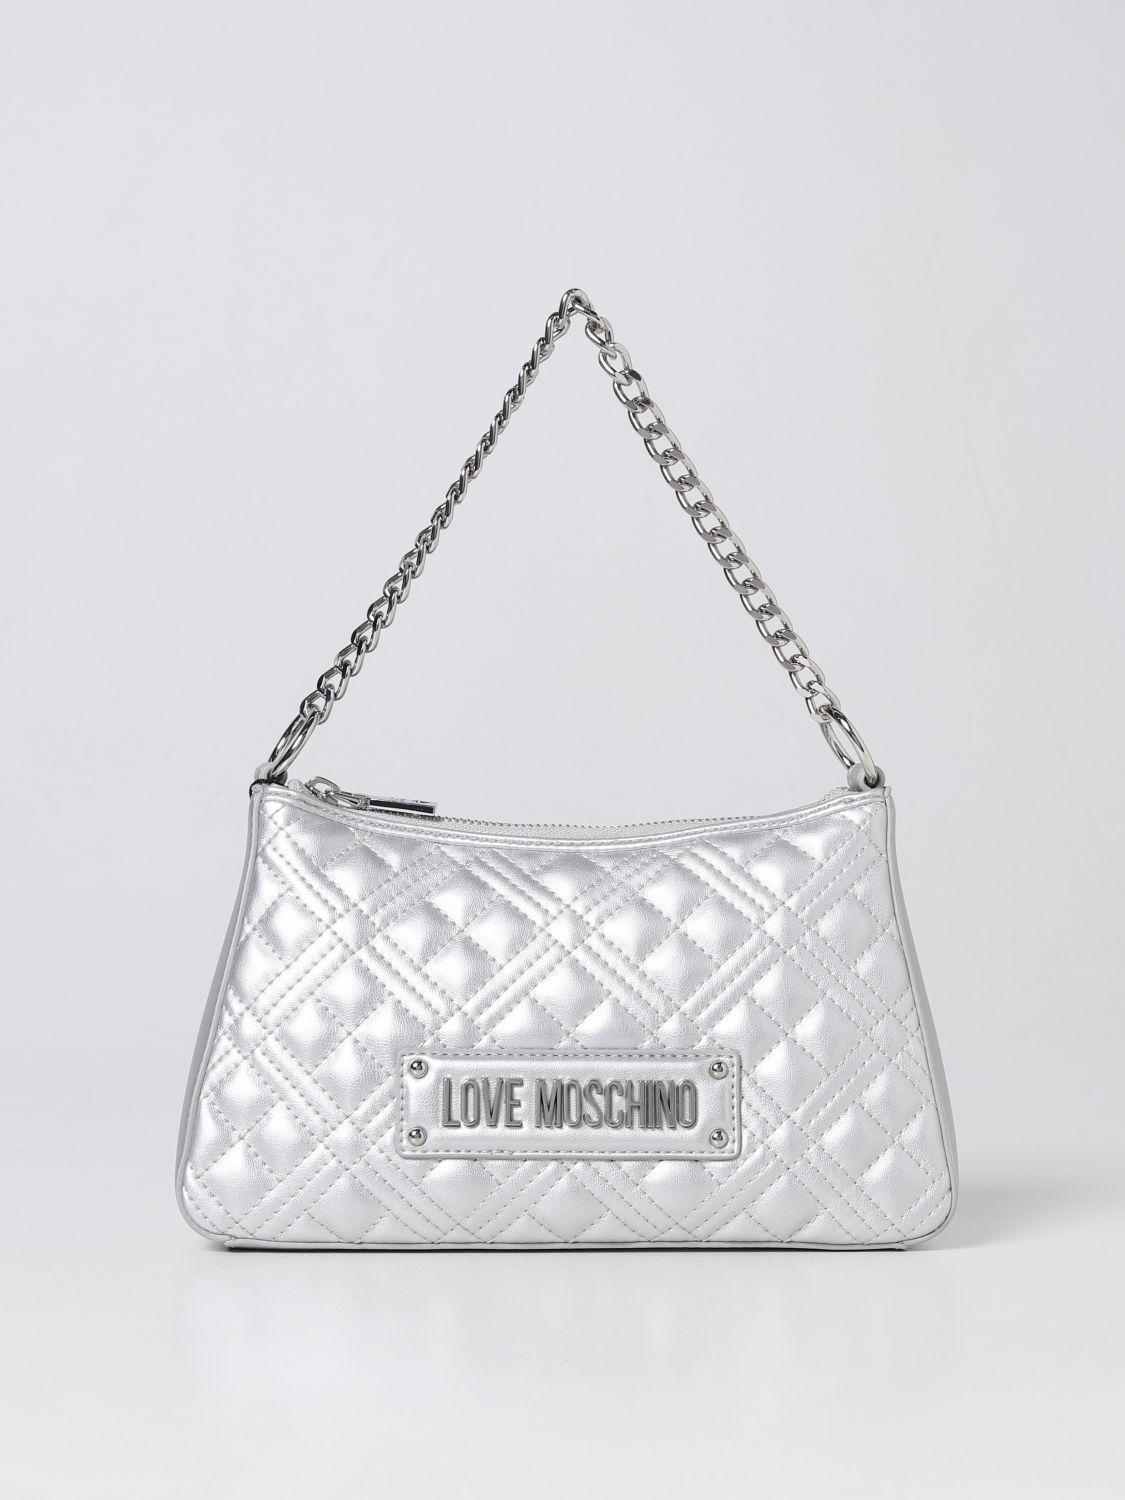 Love Moschino Shoulder Bag in White | Lyst